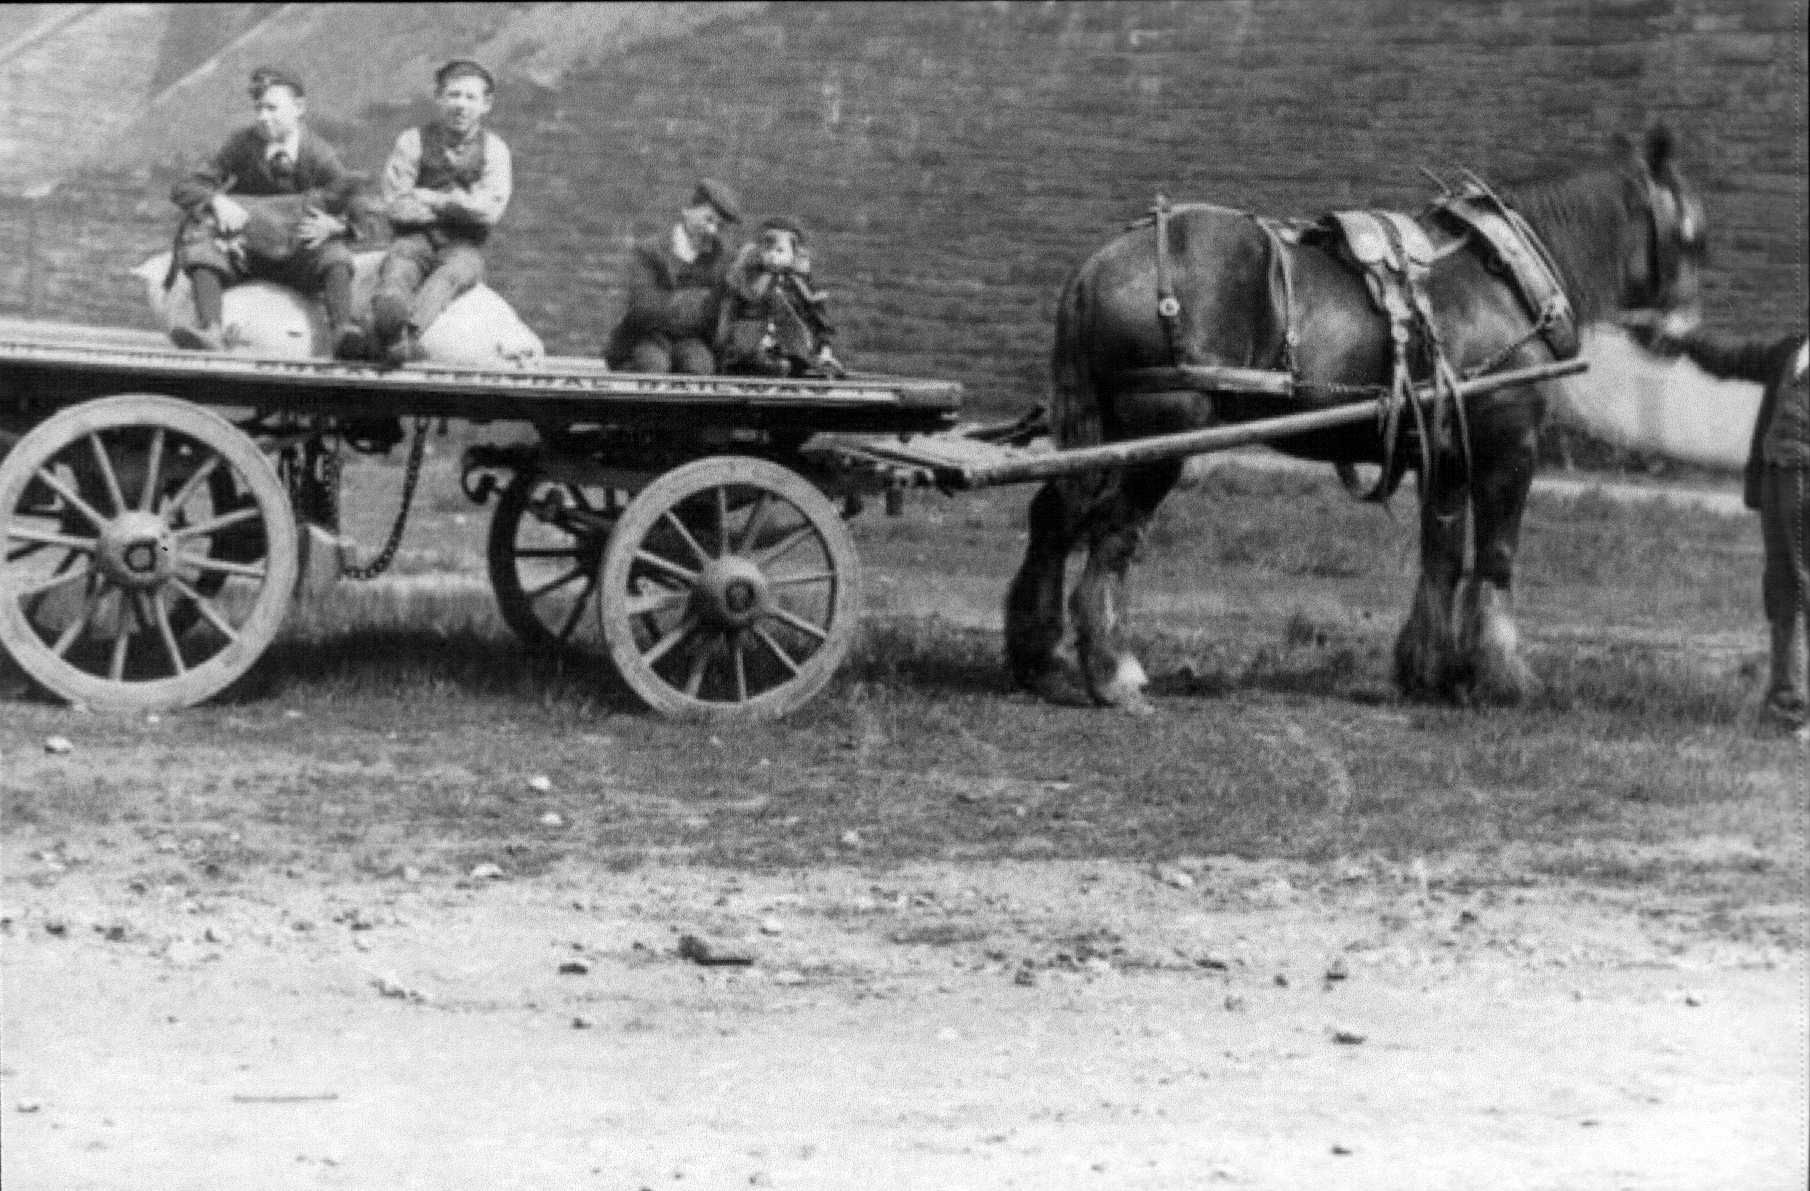 GCR horse and cart